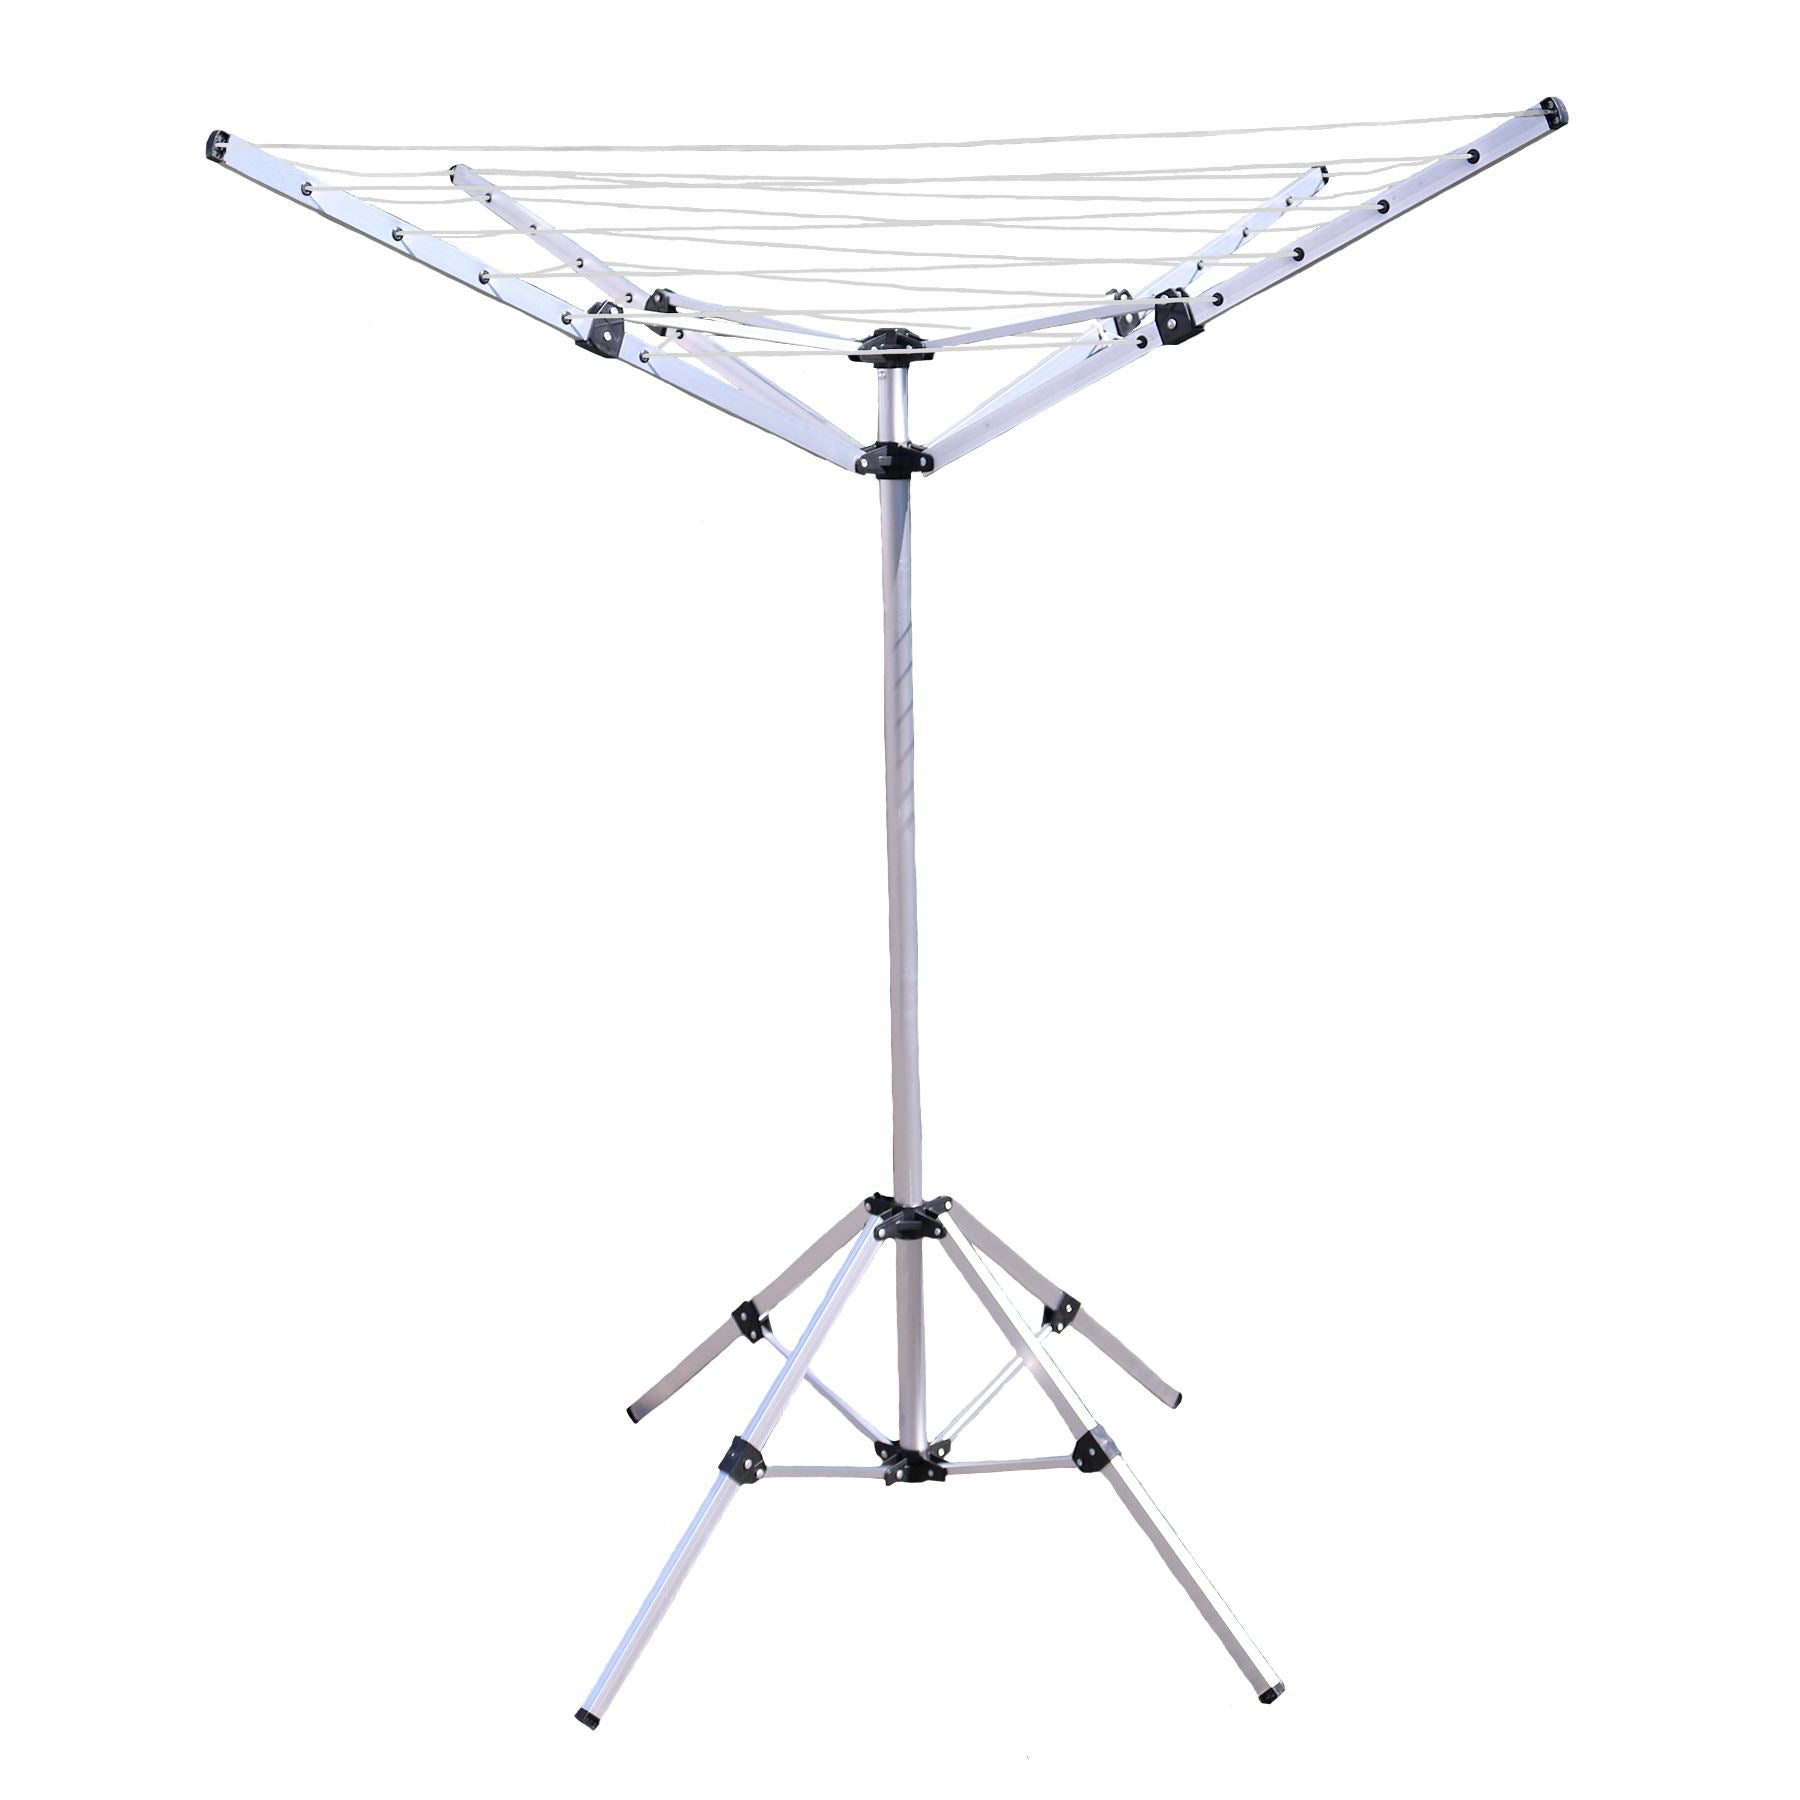 4 Arm Portable Rotary Airer Clothes Dryer Washing Line Folding Hanger 20 Metres